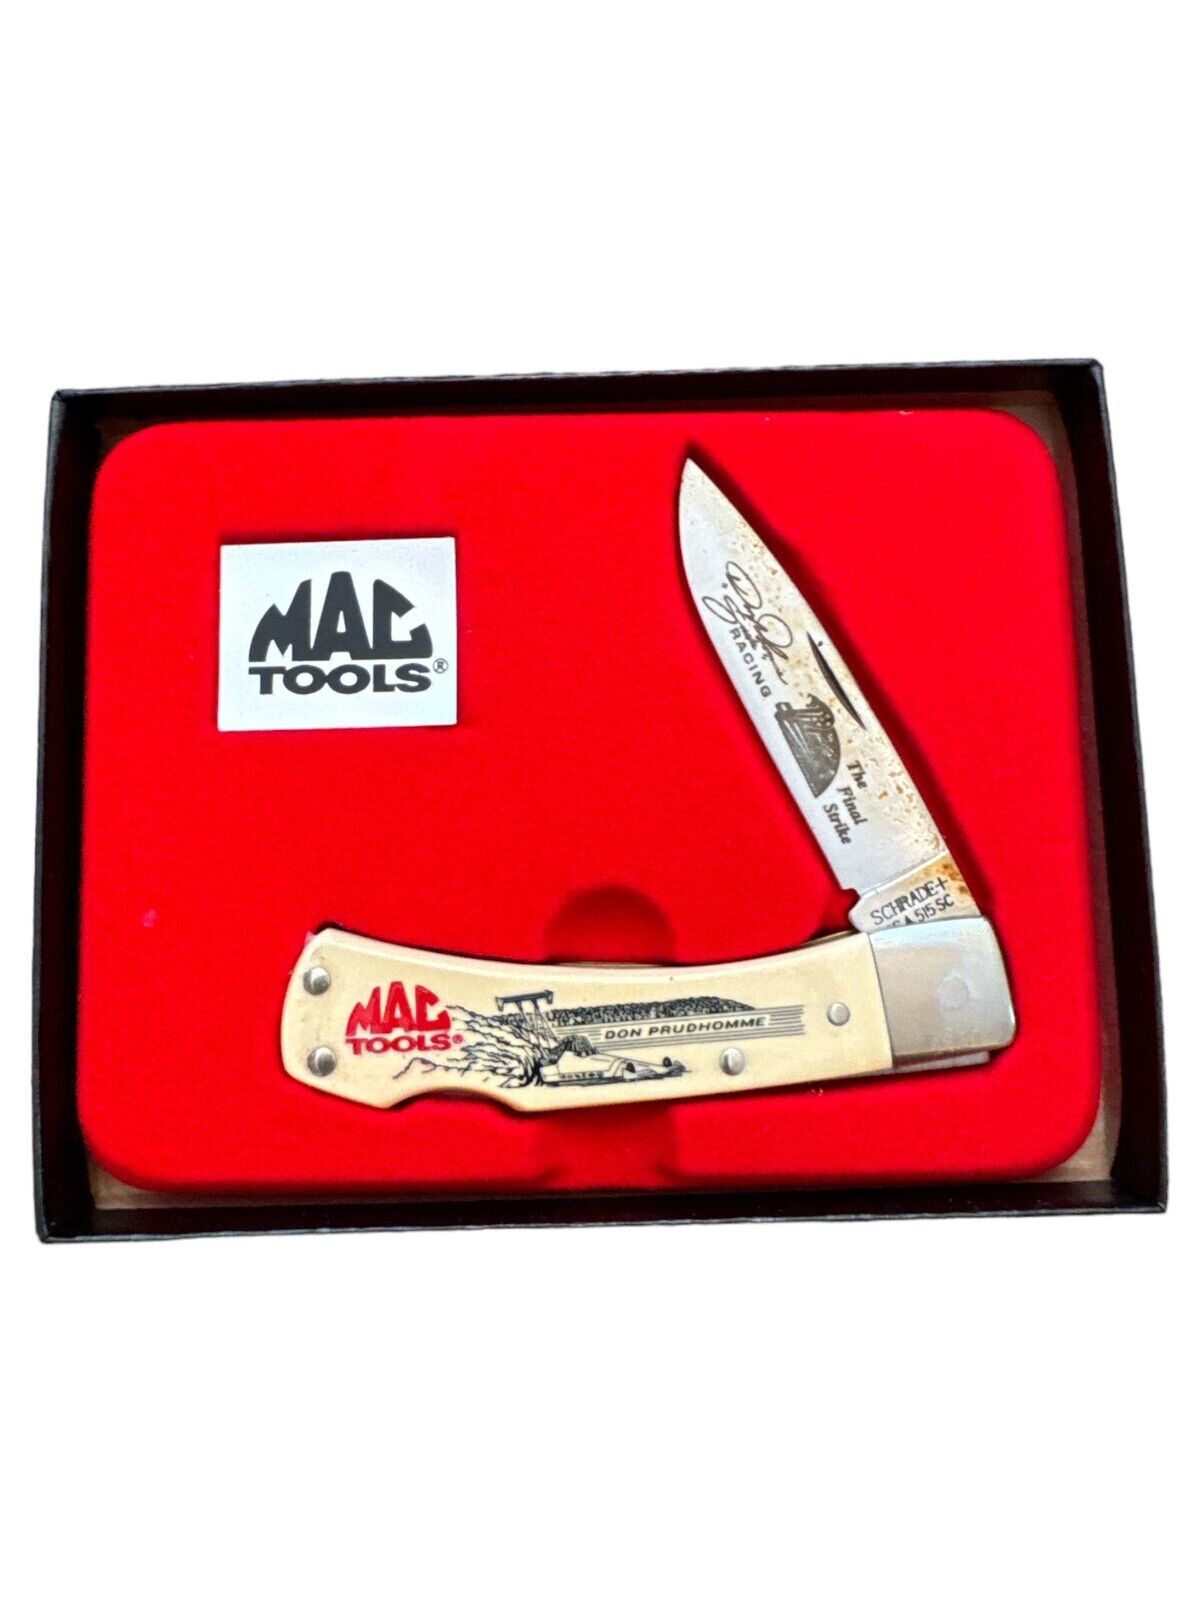 Schrade Cutlery MAC Tools Don Prudhomme Collectible Final Strike Knife